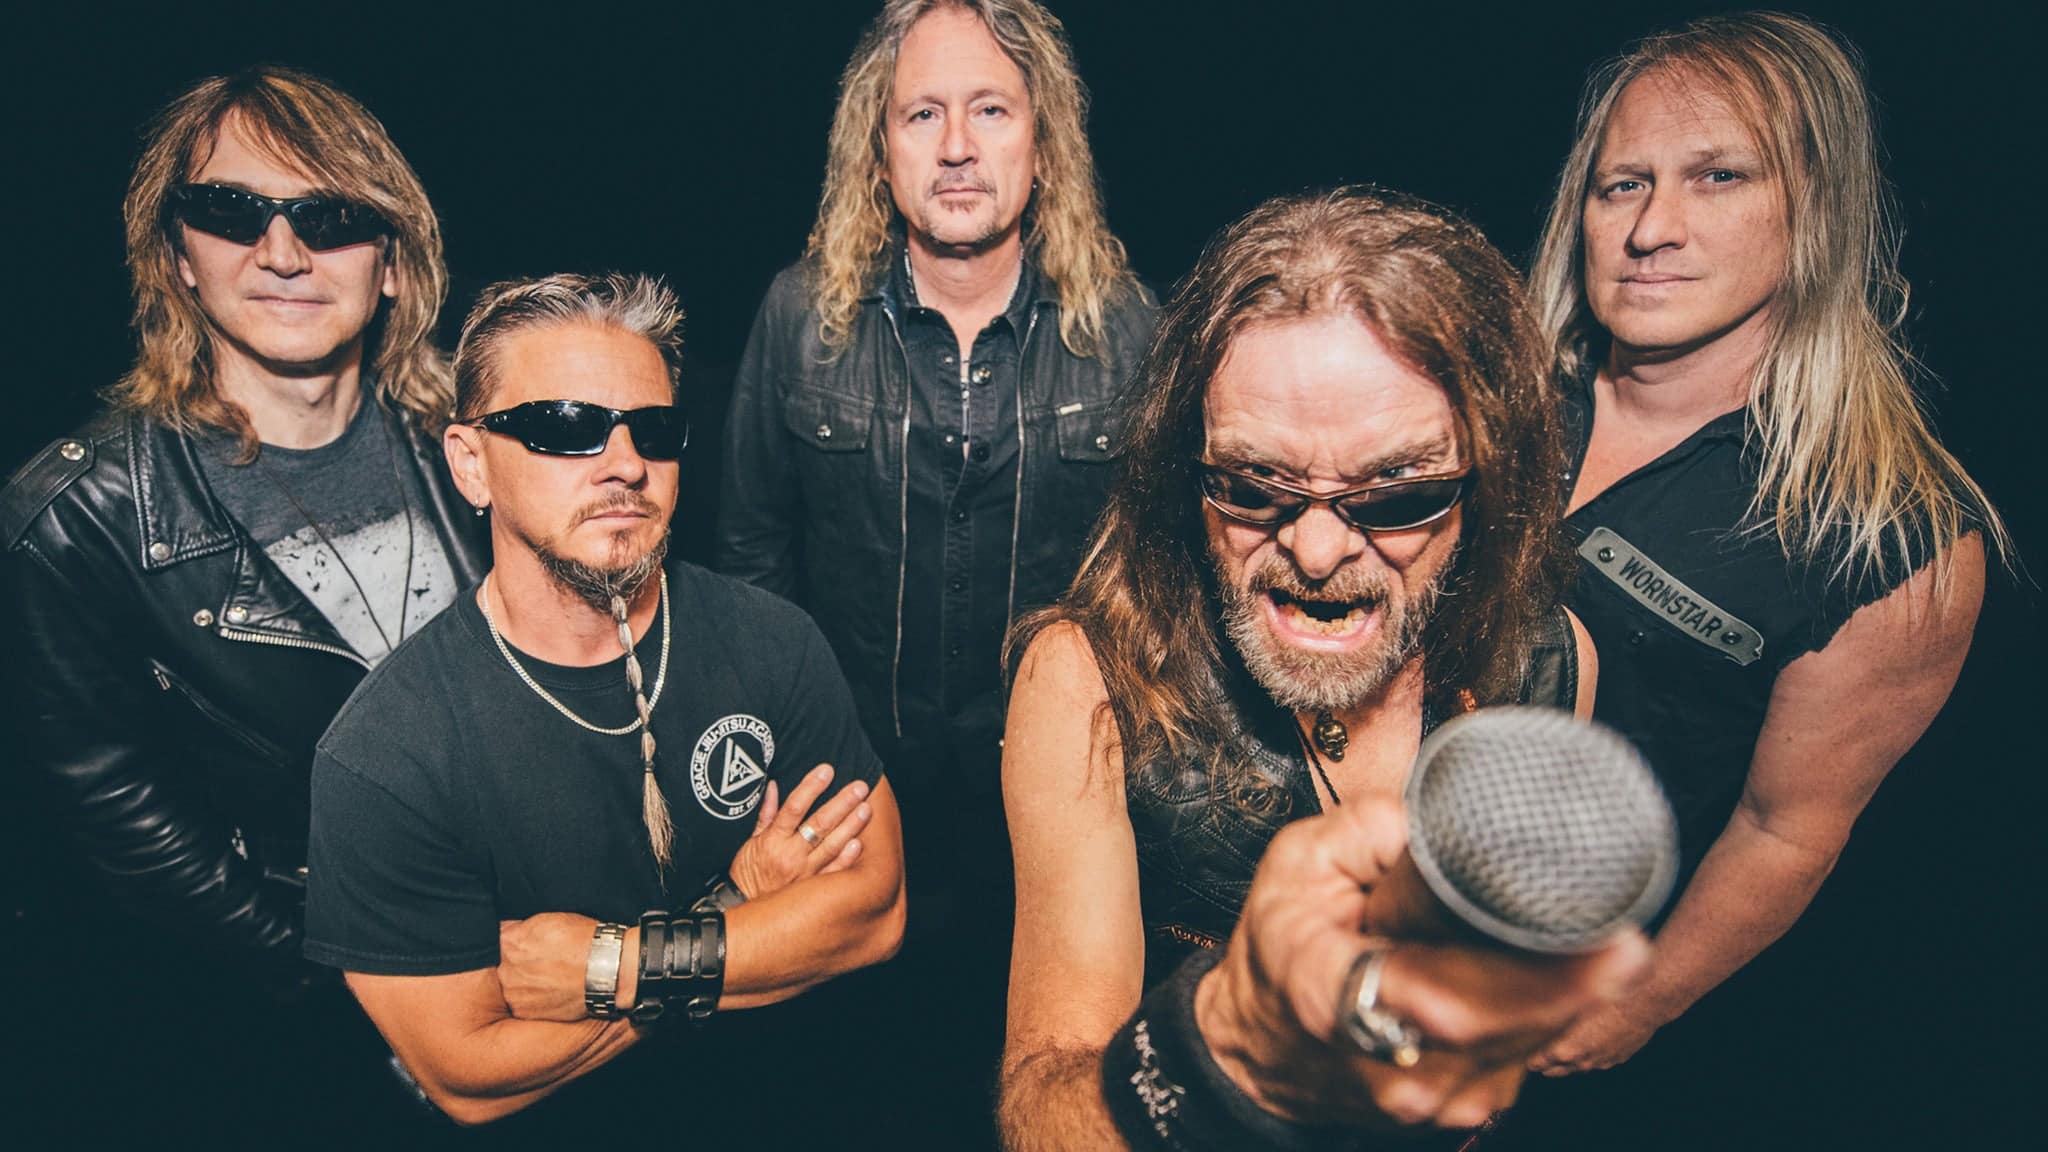 VIDEO: FLOTSAM AND JETSAM Drop The New Music Video For The Song ‘Burn The Sky’